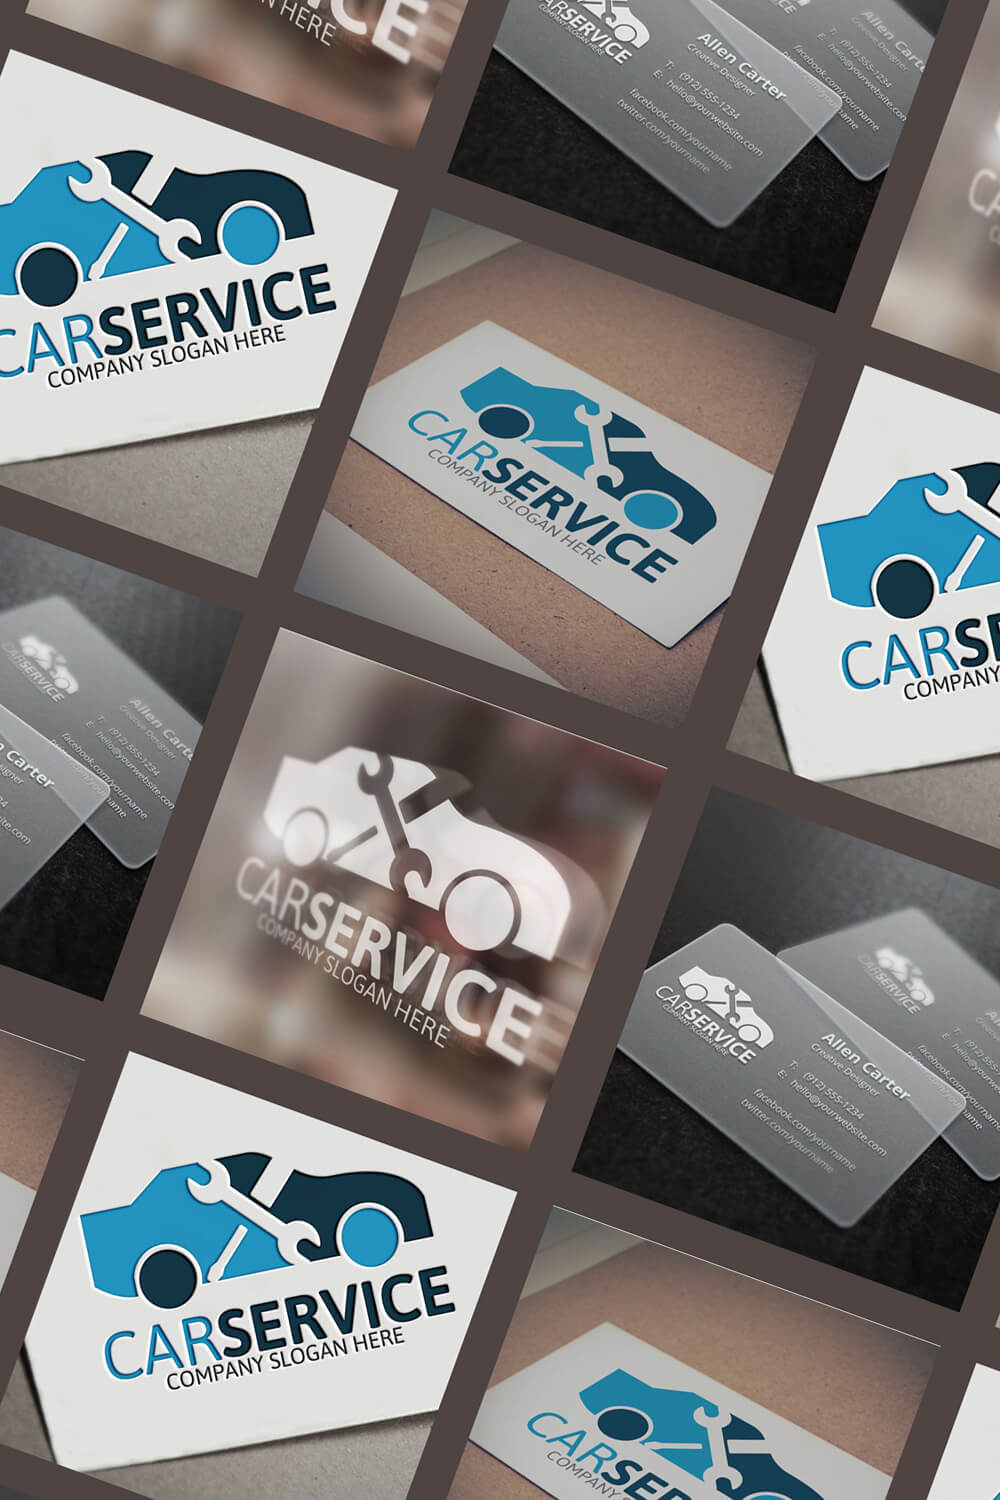 Blue and blue on white car service logo in square pictures in a checkerboard pattern.